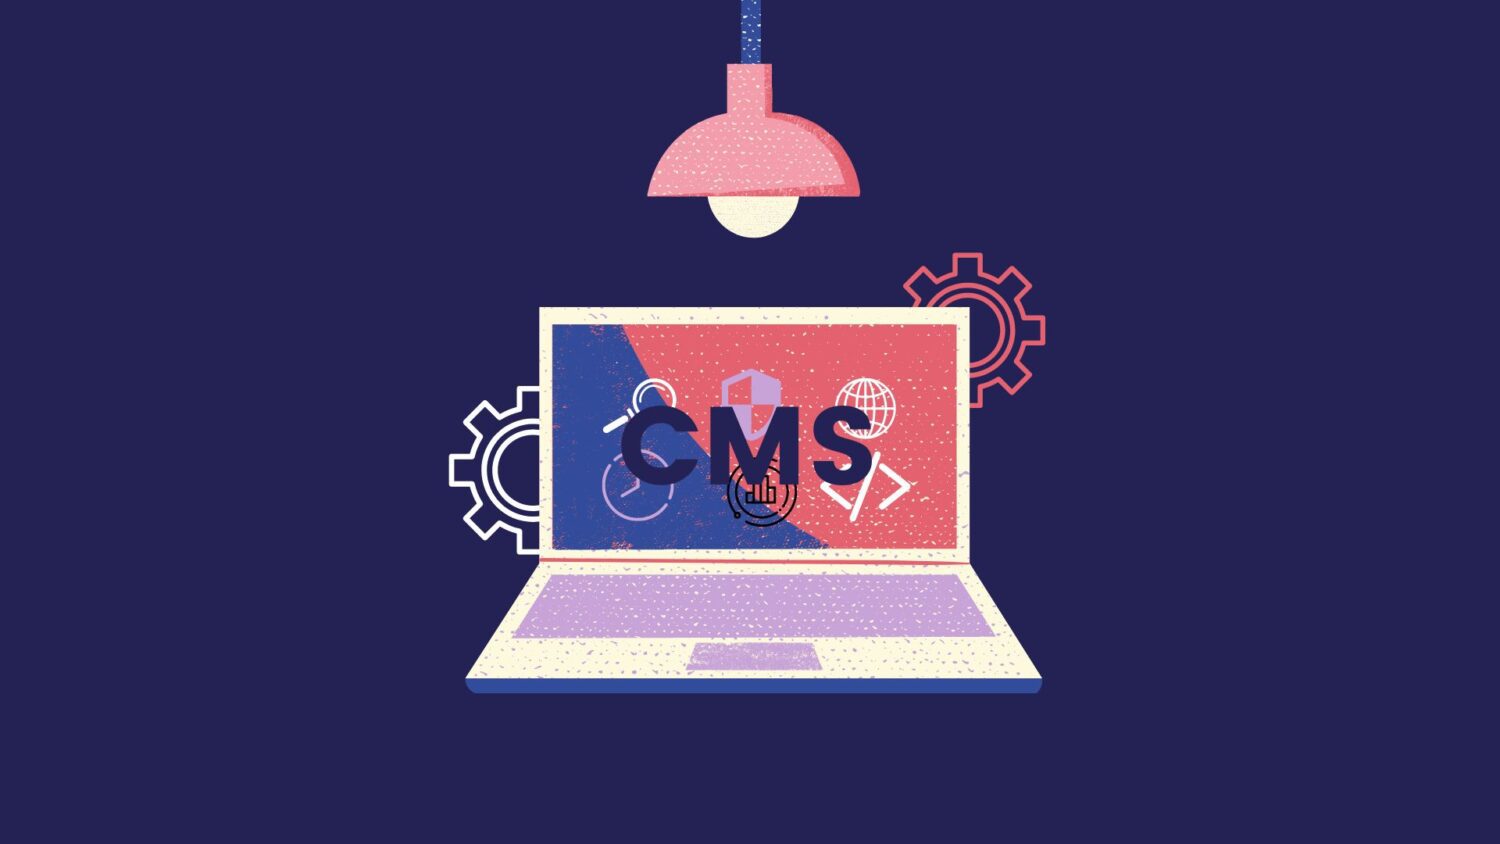 CMS solutions